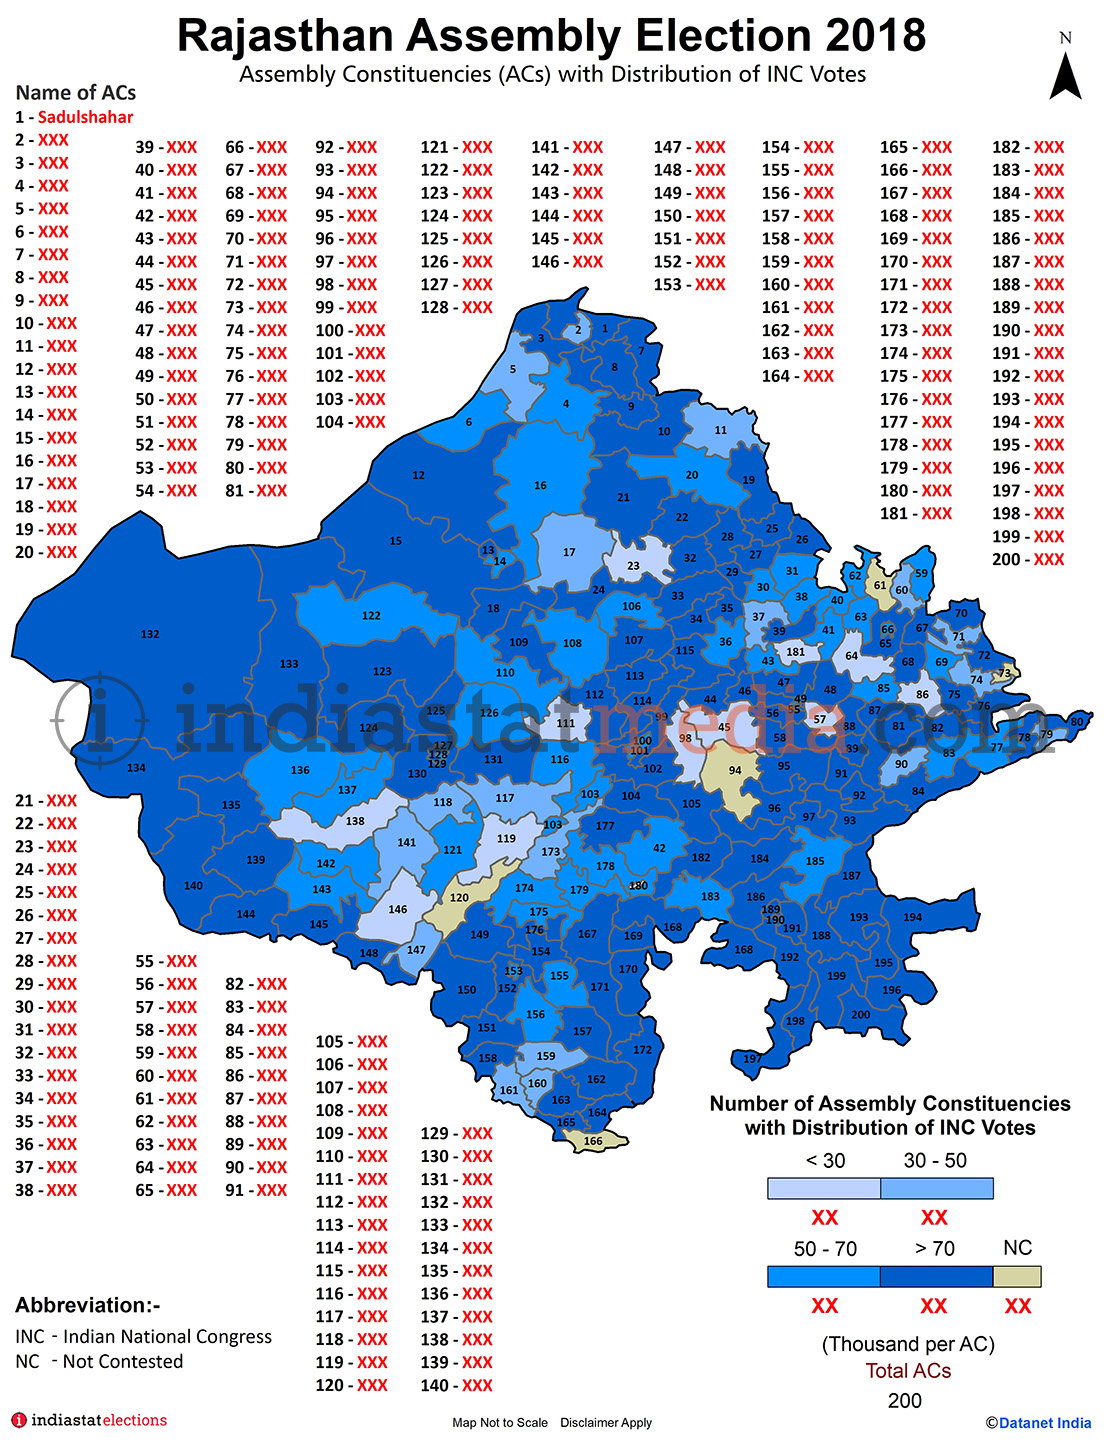 Distribution of INC Votes by Constituencies in Rajasthan (Assembly Election - 2018)